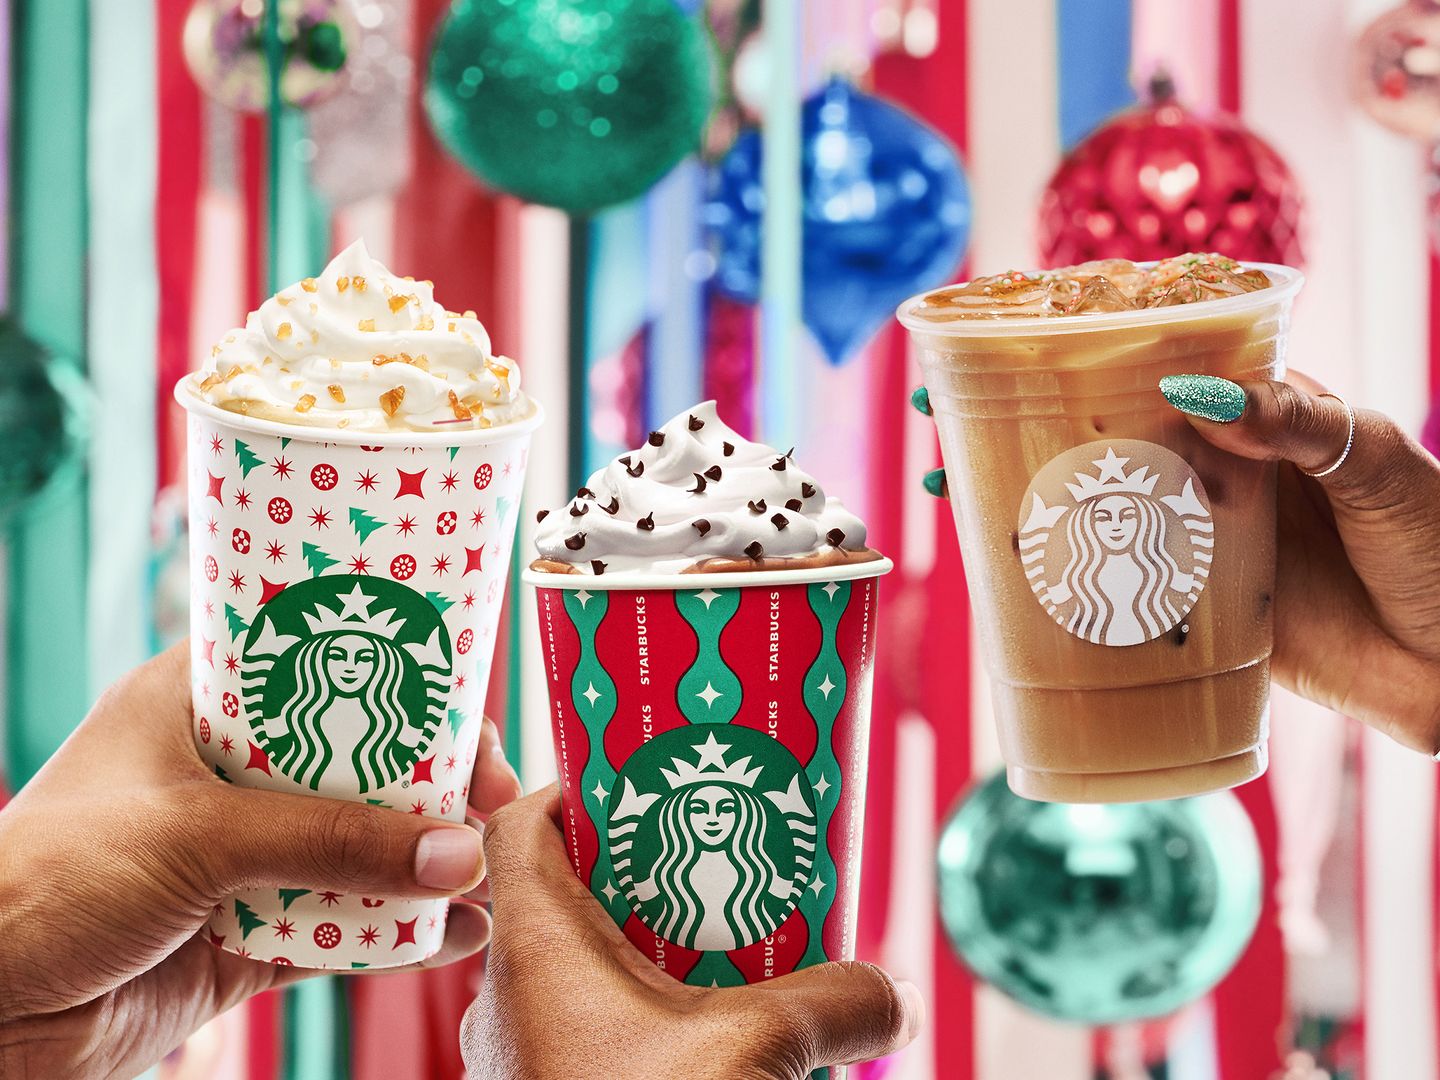 Starbucks is bringing back its red holiday cups — but there's a twist